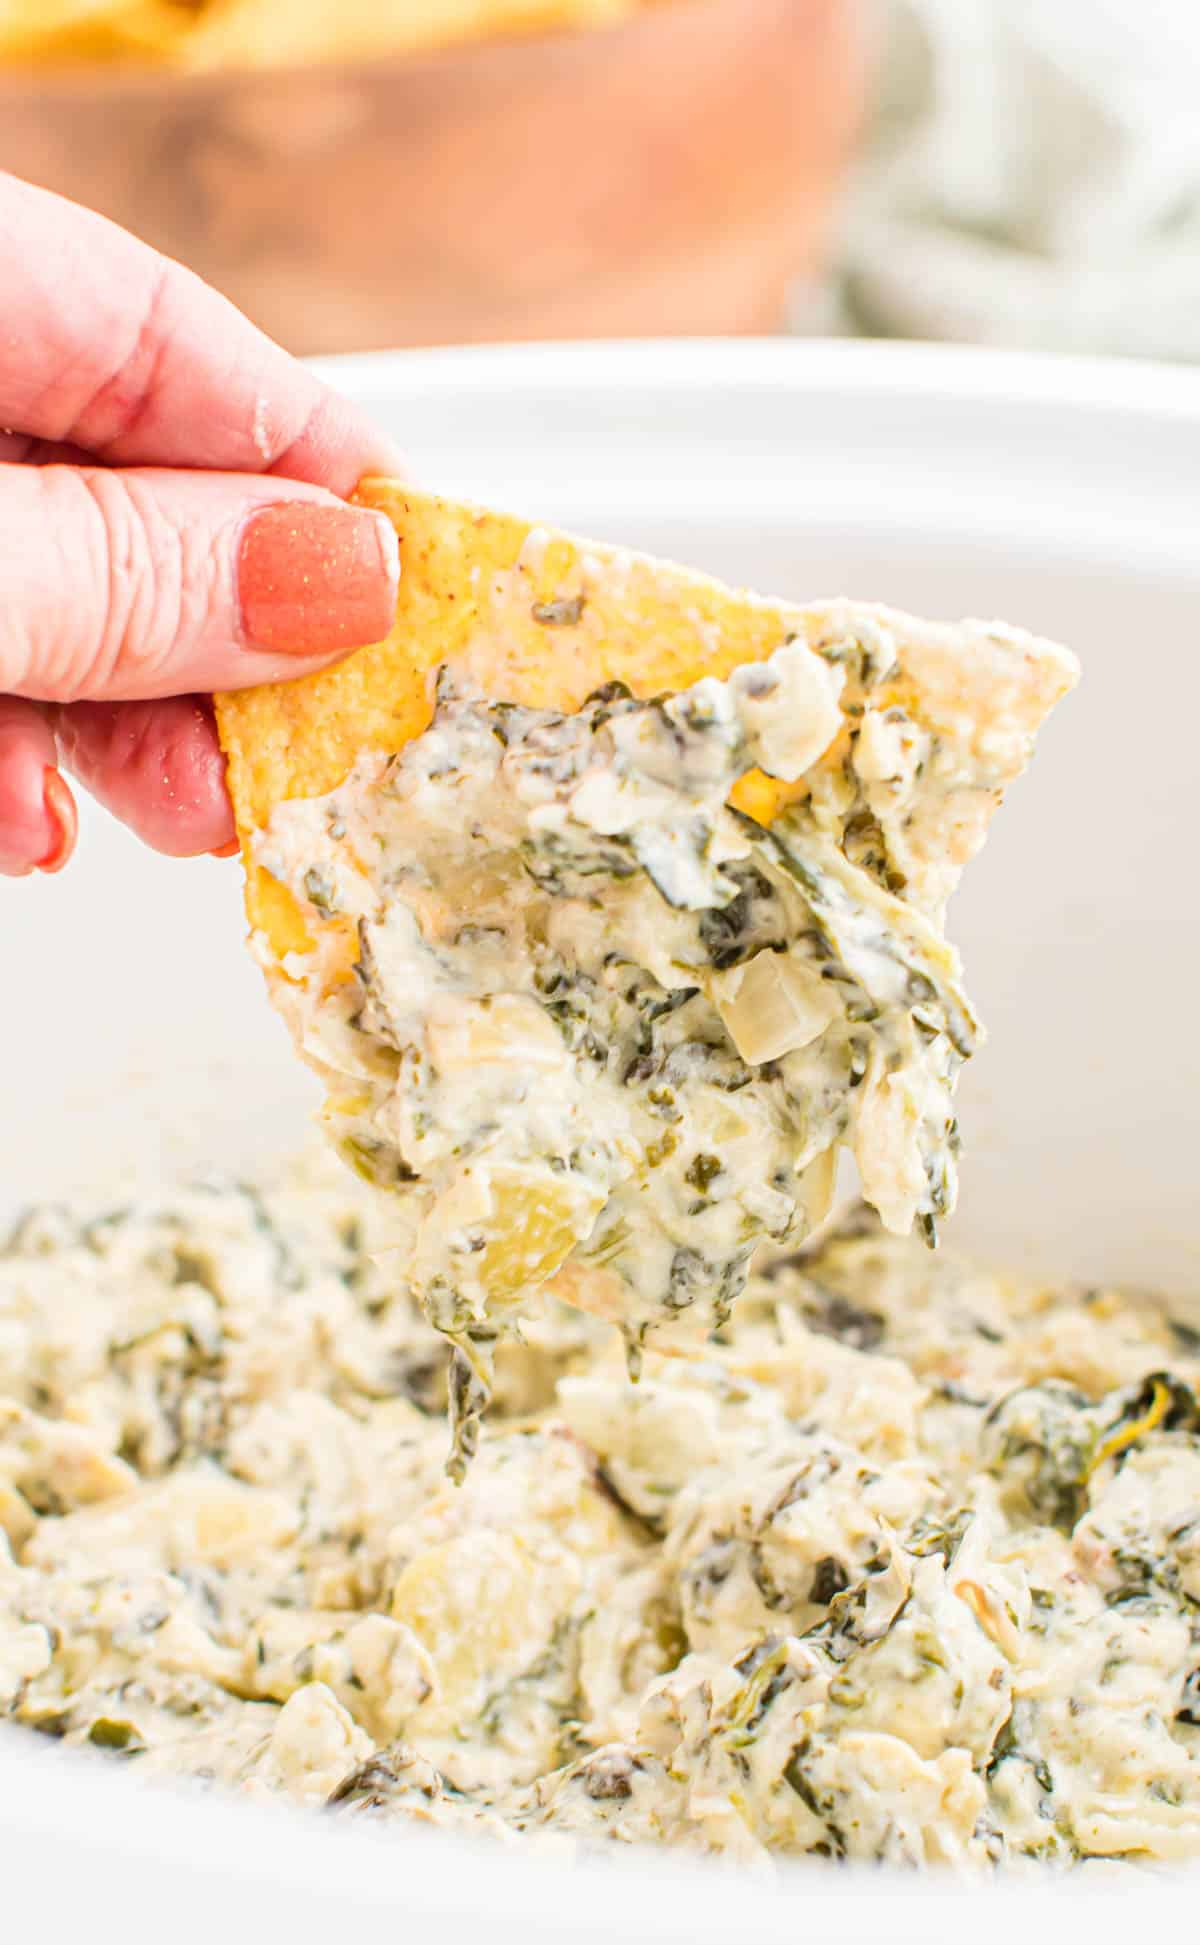 Slow Cooker Spinach and Artichoke Dip Recipe – Home Cooking Memories